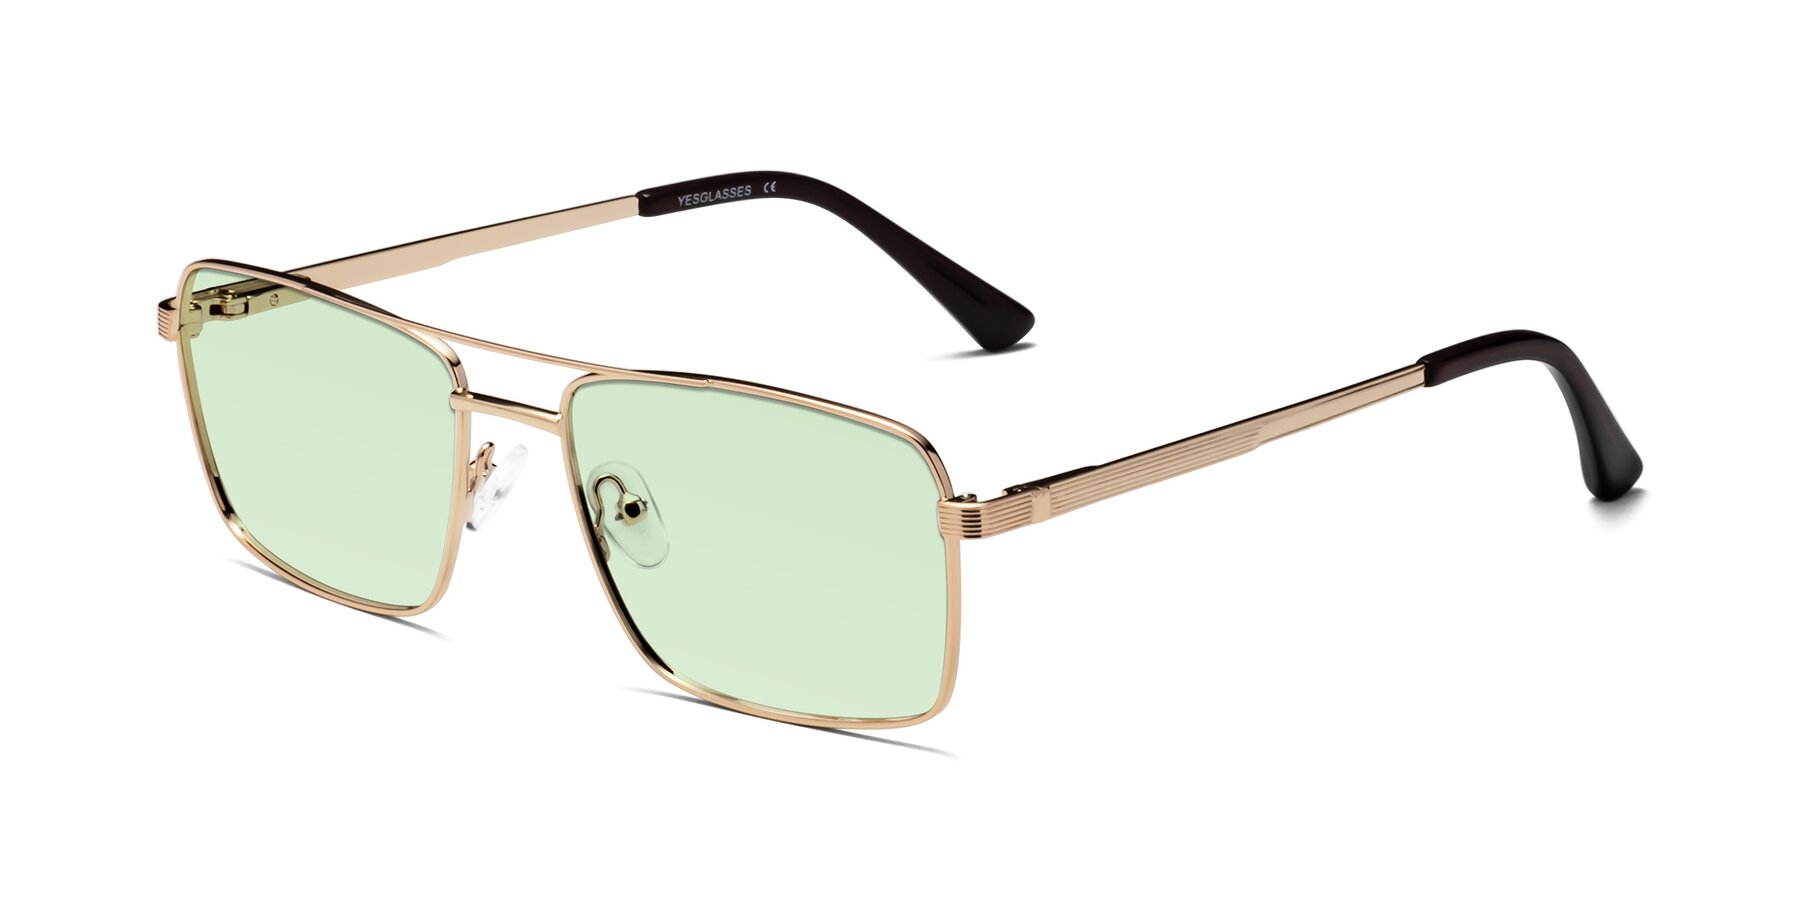 Angle of Beckum in Gold with Light Green Tinted Lenses